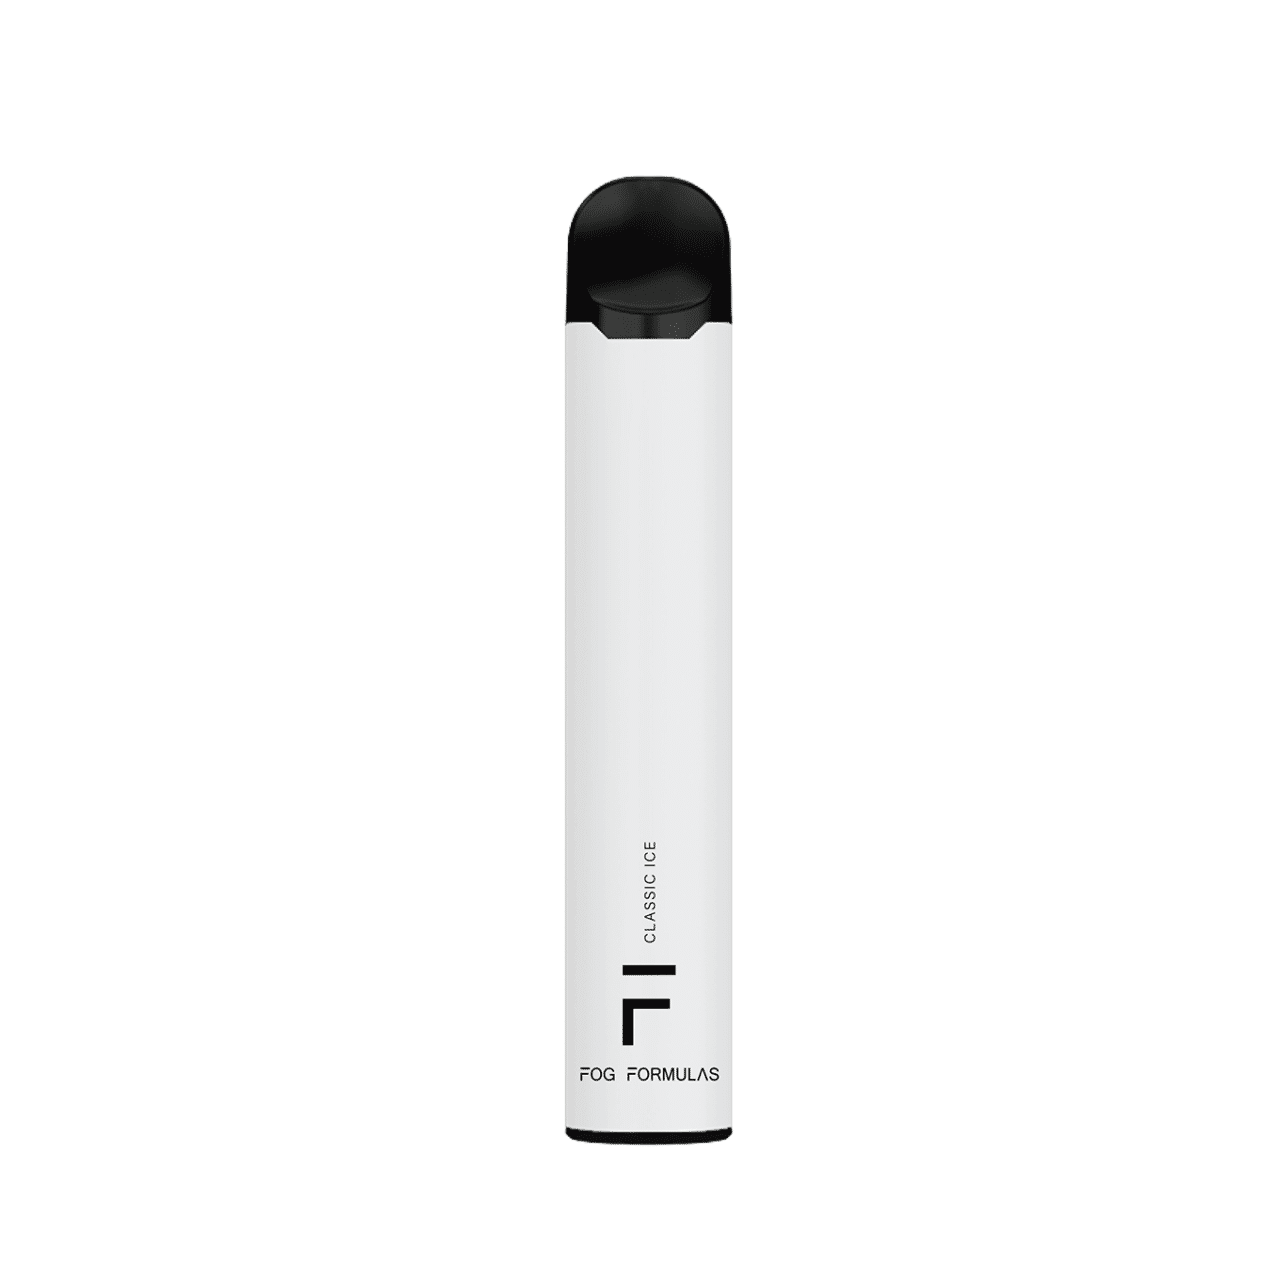 [Disposables] Fog Formula - Classic Ice Disposable Pod Systems Vancouver Toronto Calgary Richmond Montreal Kingsway Winnipeg Quebec Coquitlam Canada Canadian Vapes Shop Free Shipping E-Juice Mods Nic Salt